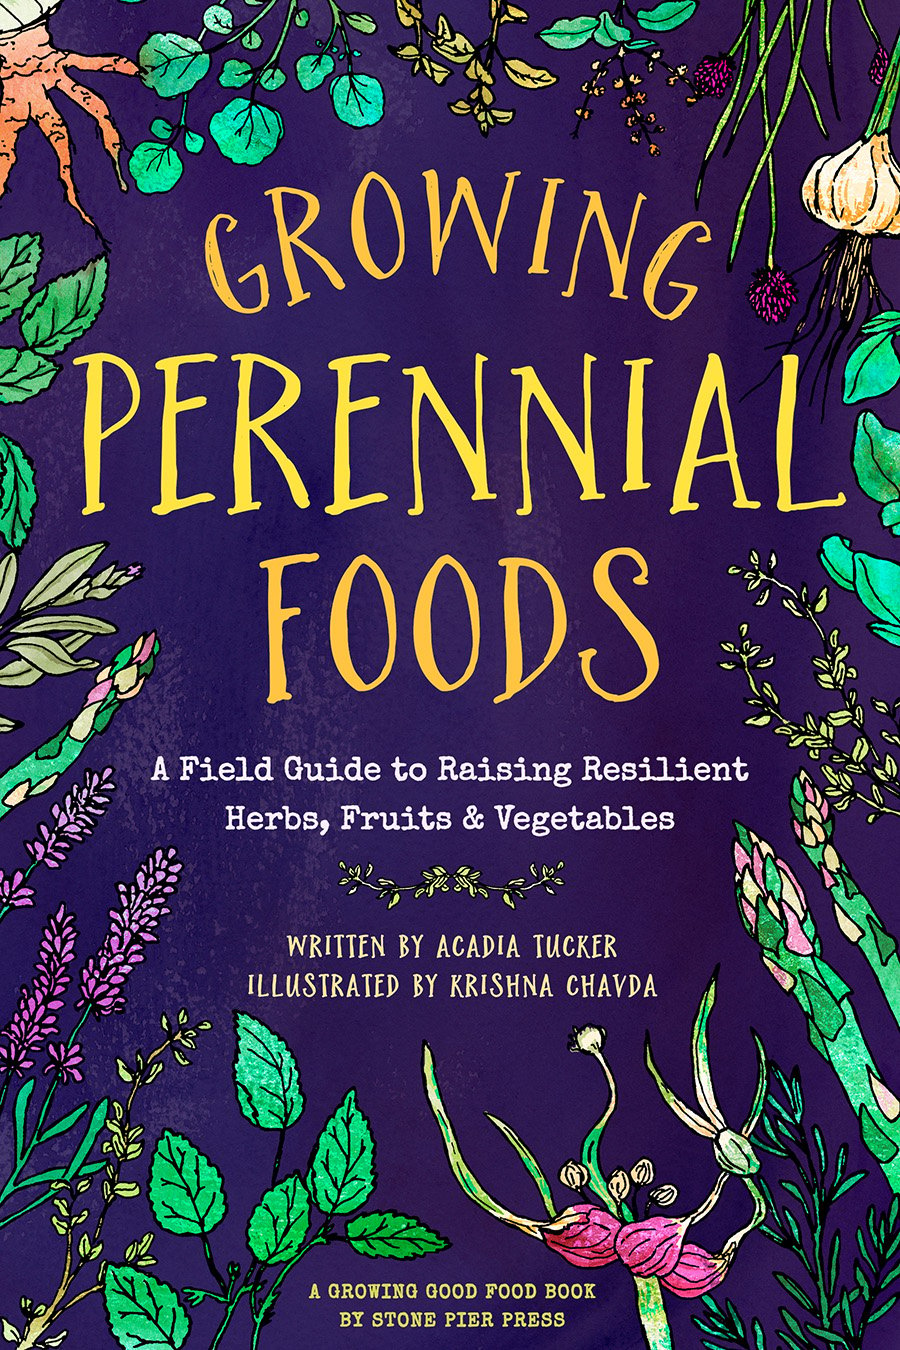 The Growing Perennial Foods cover